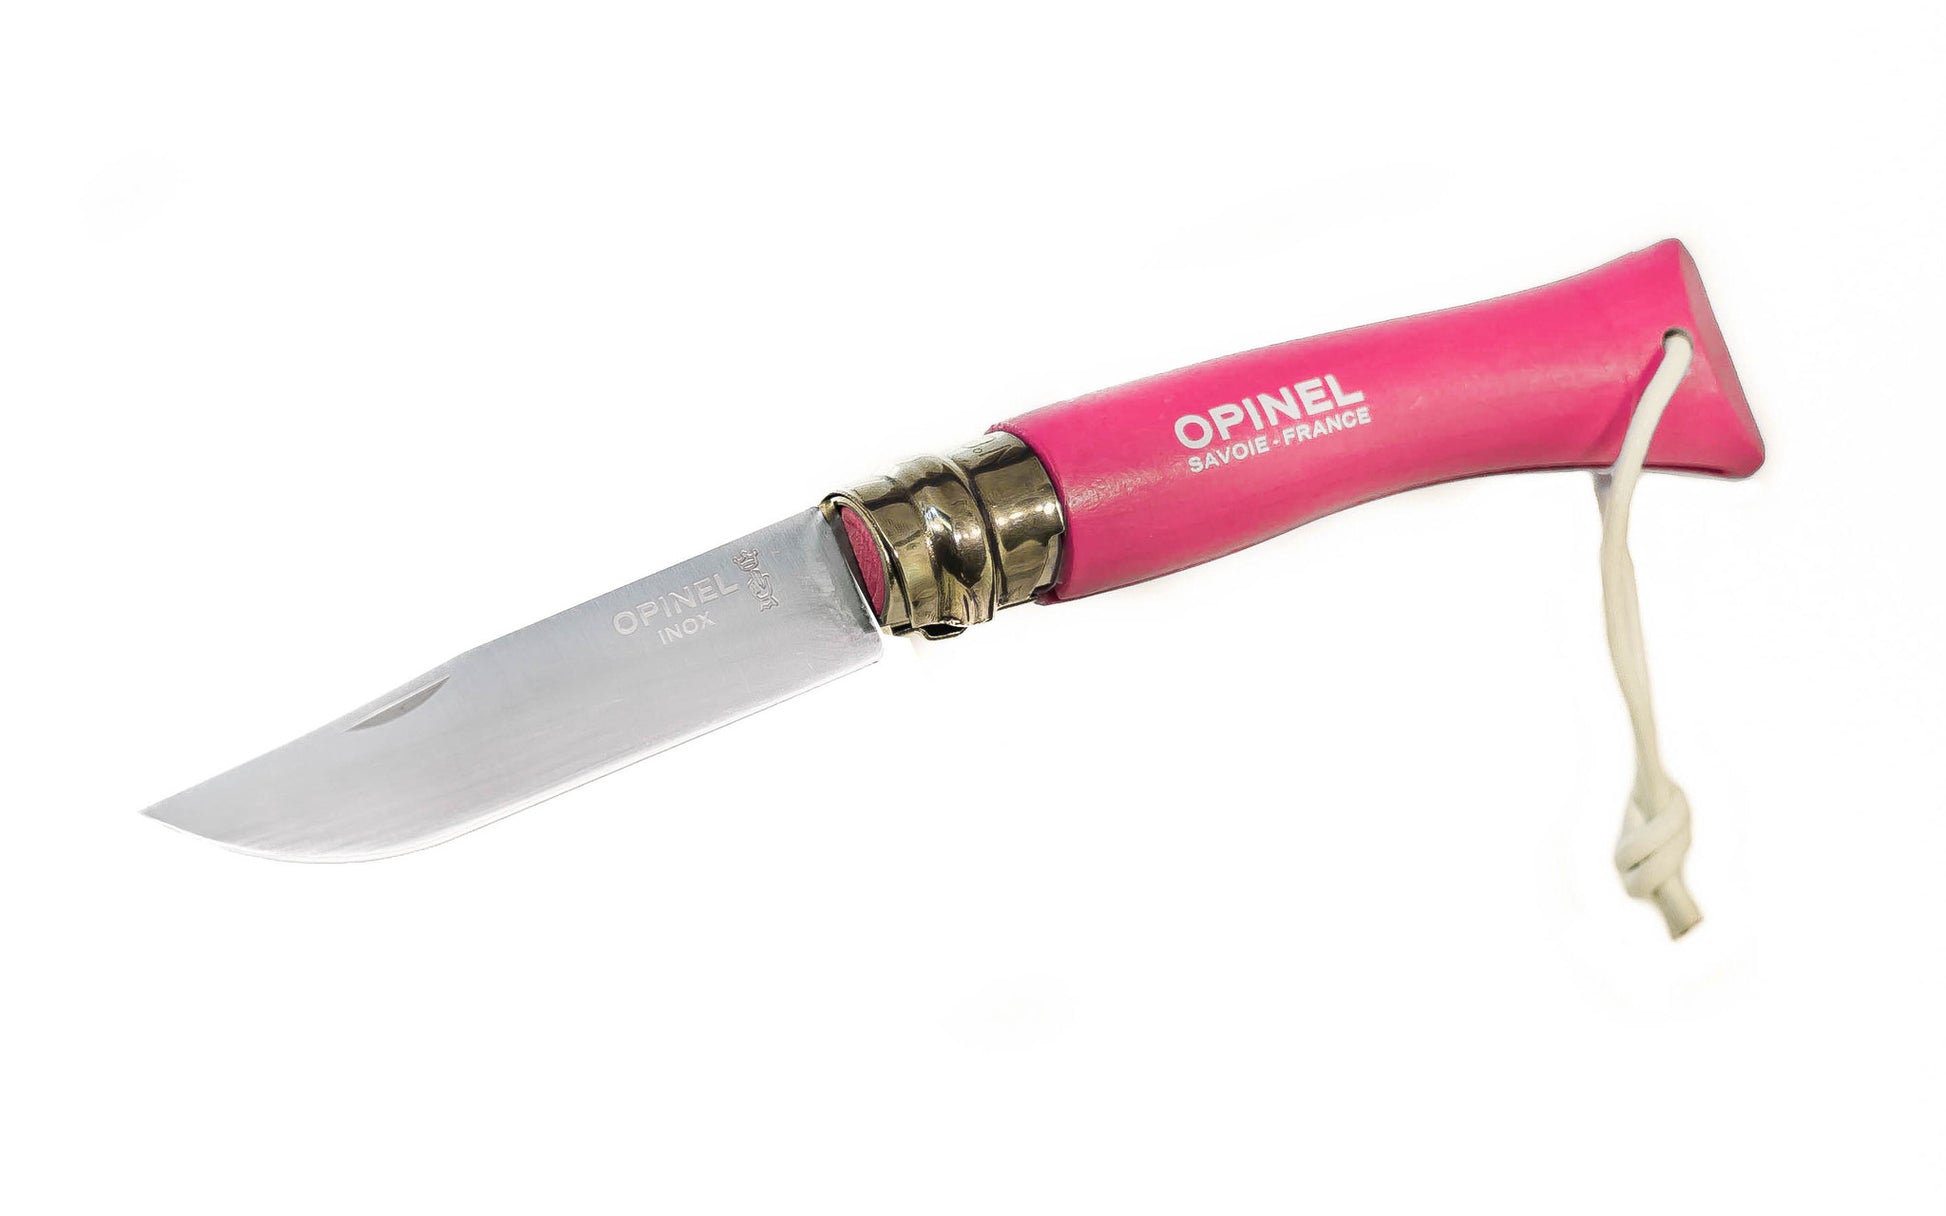 Opinel Stainless Steel Trekking Knife ~ "Fuchsia" Color ~ Made in France ~ 3-3/16" long foldable blade with stainless locking collar ~ Made of 12c27 Sandvik stainless steel ~ Painted Beechwood handle with leather loop